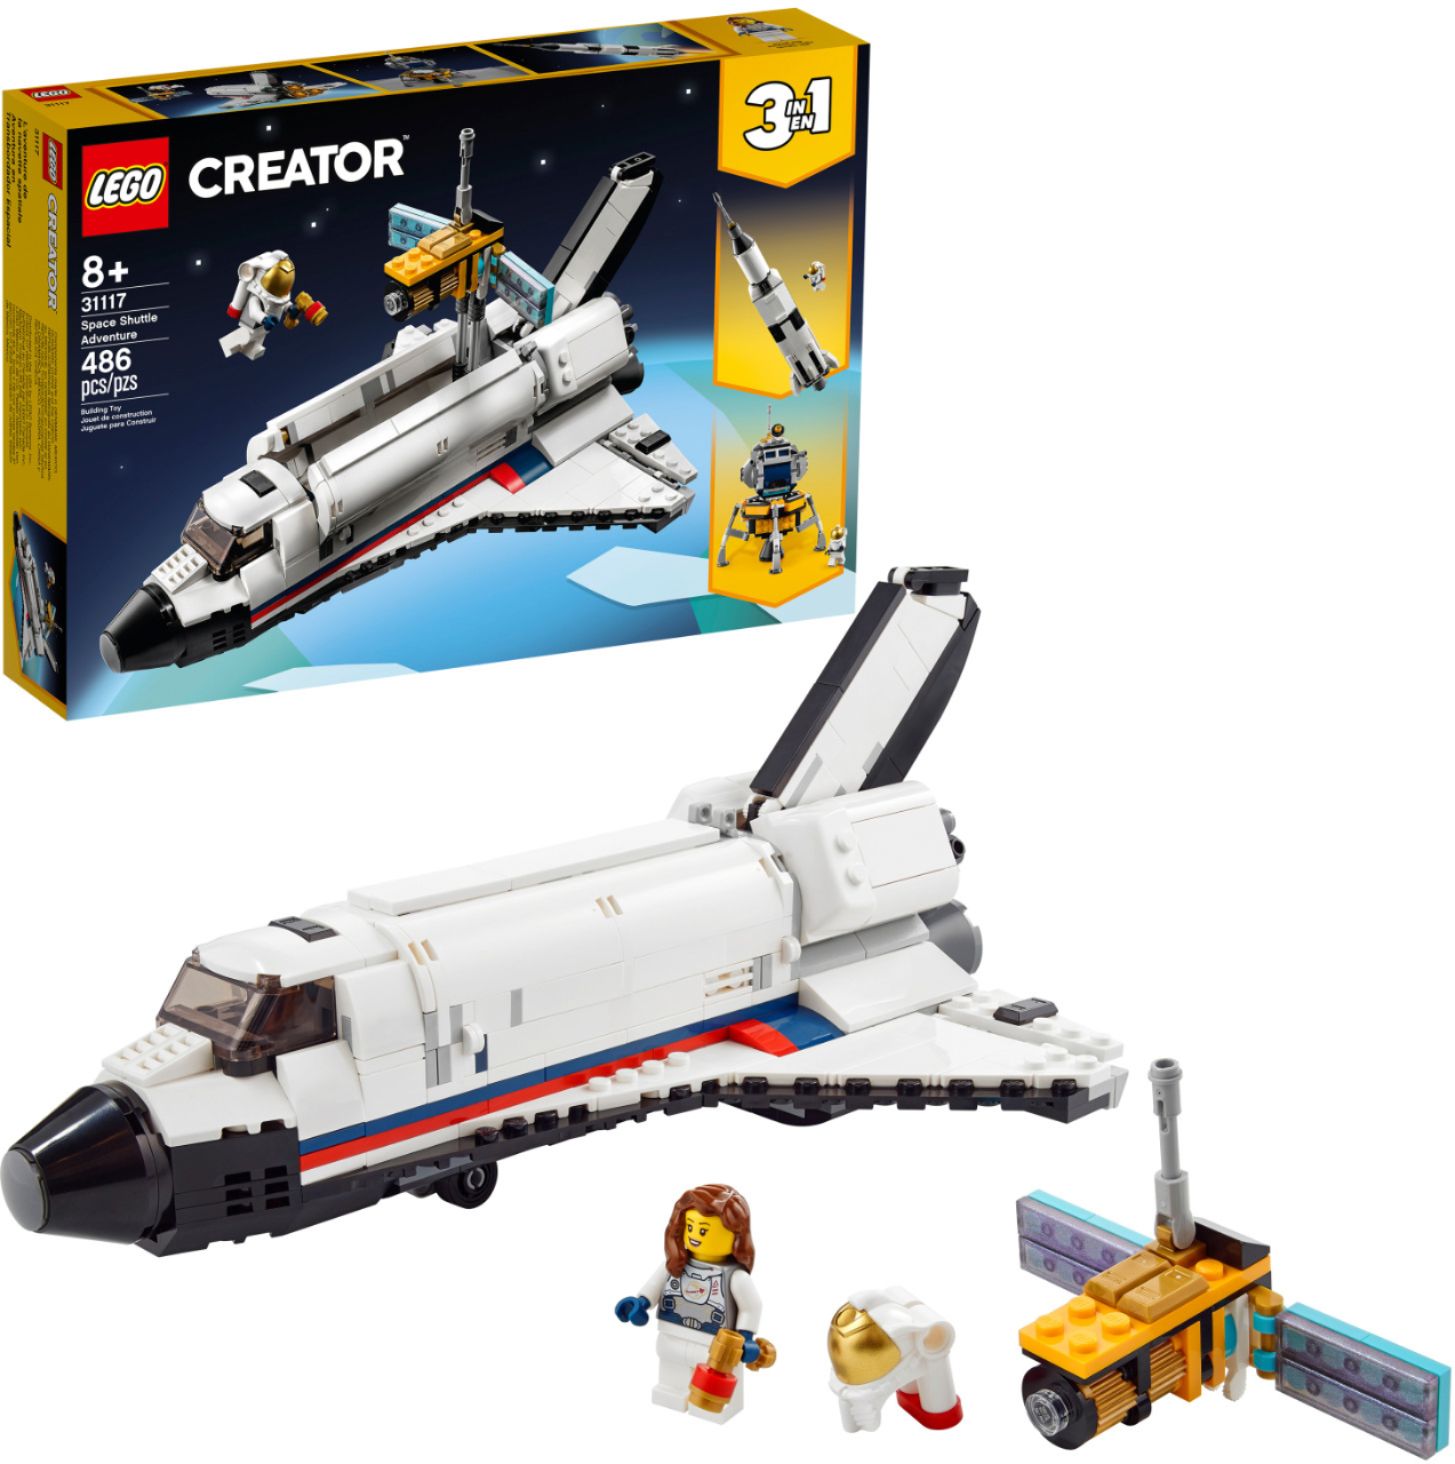 LEGO Launching Awesome Spaceport Shuttle Sets in August